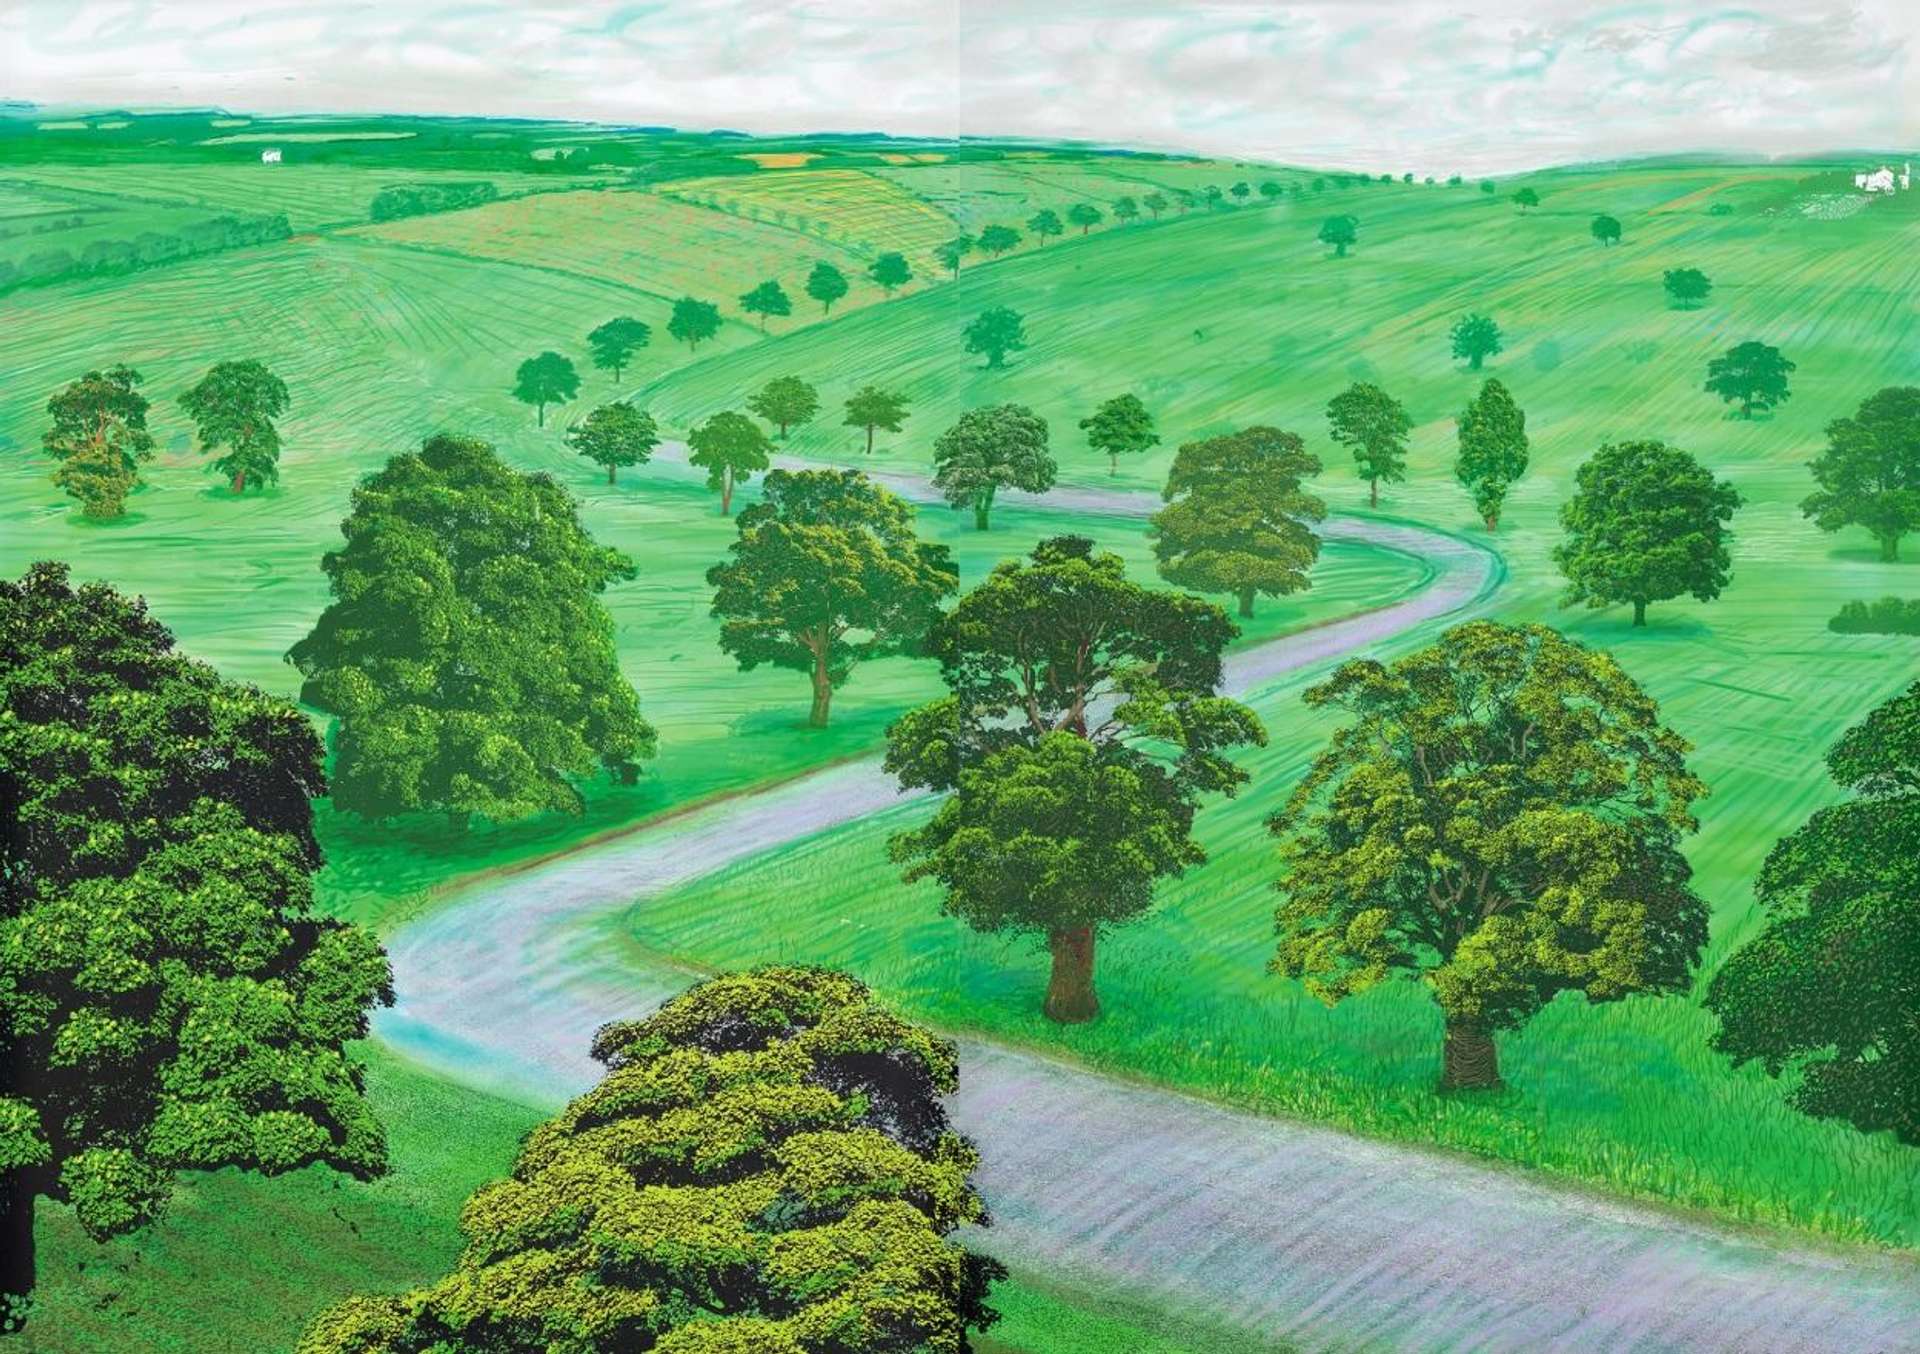 10 Facts About David Hockney's Digital Drawings